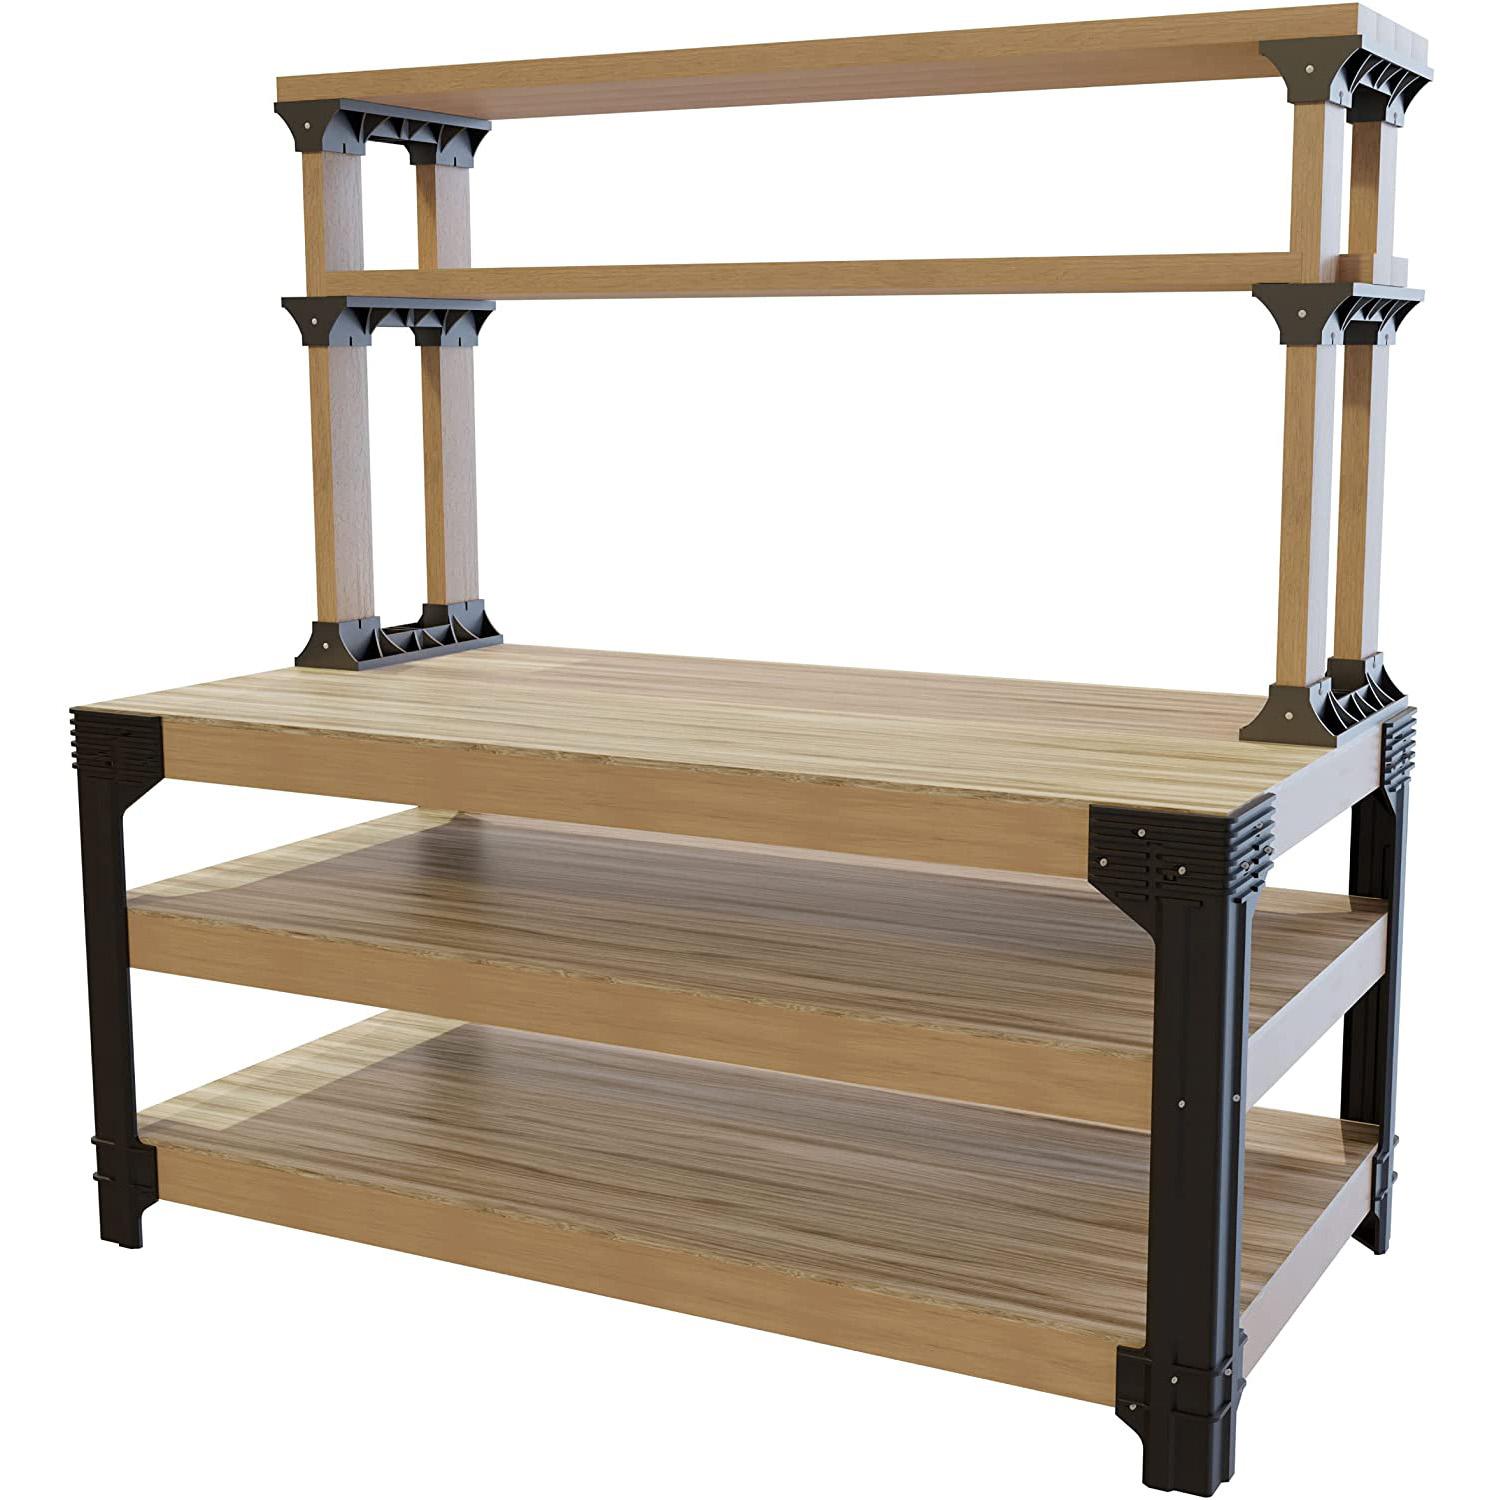 Custom Work Bench and Shelving Storage System for $46.92 Shipped